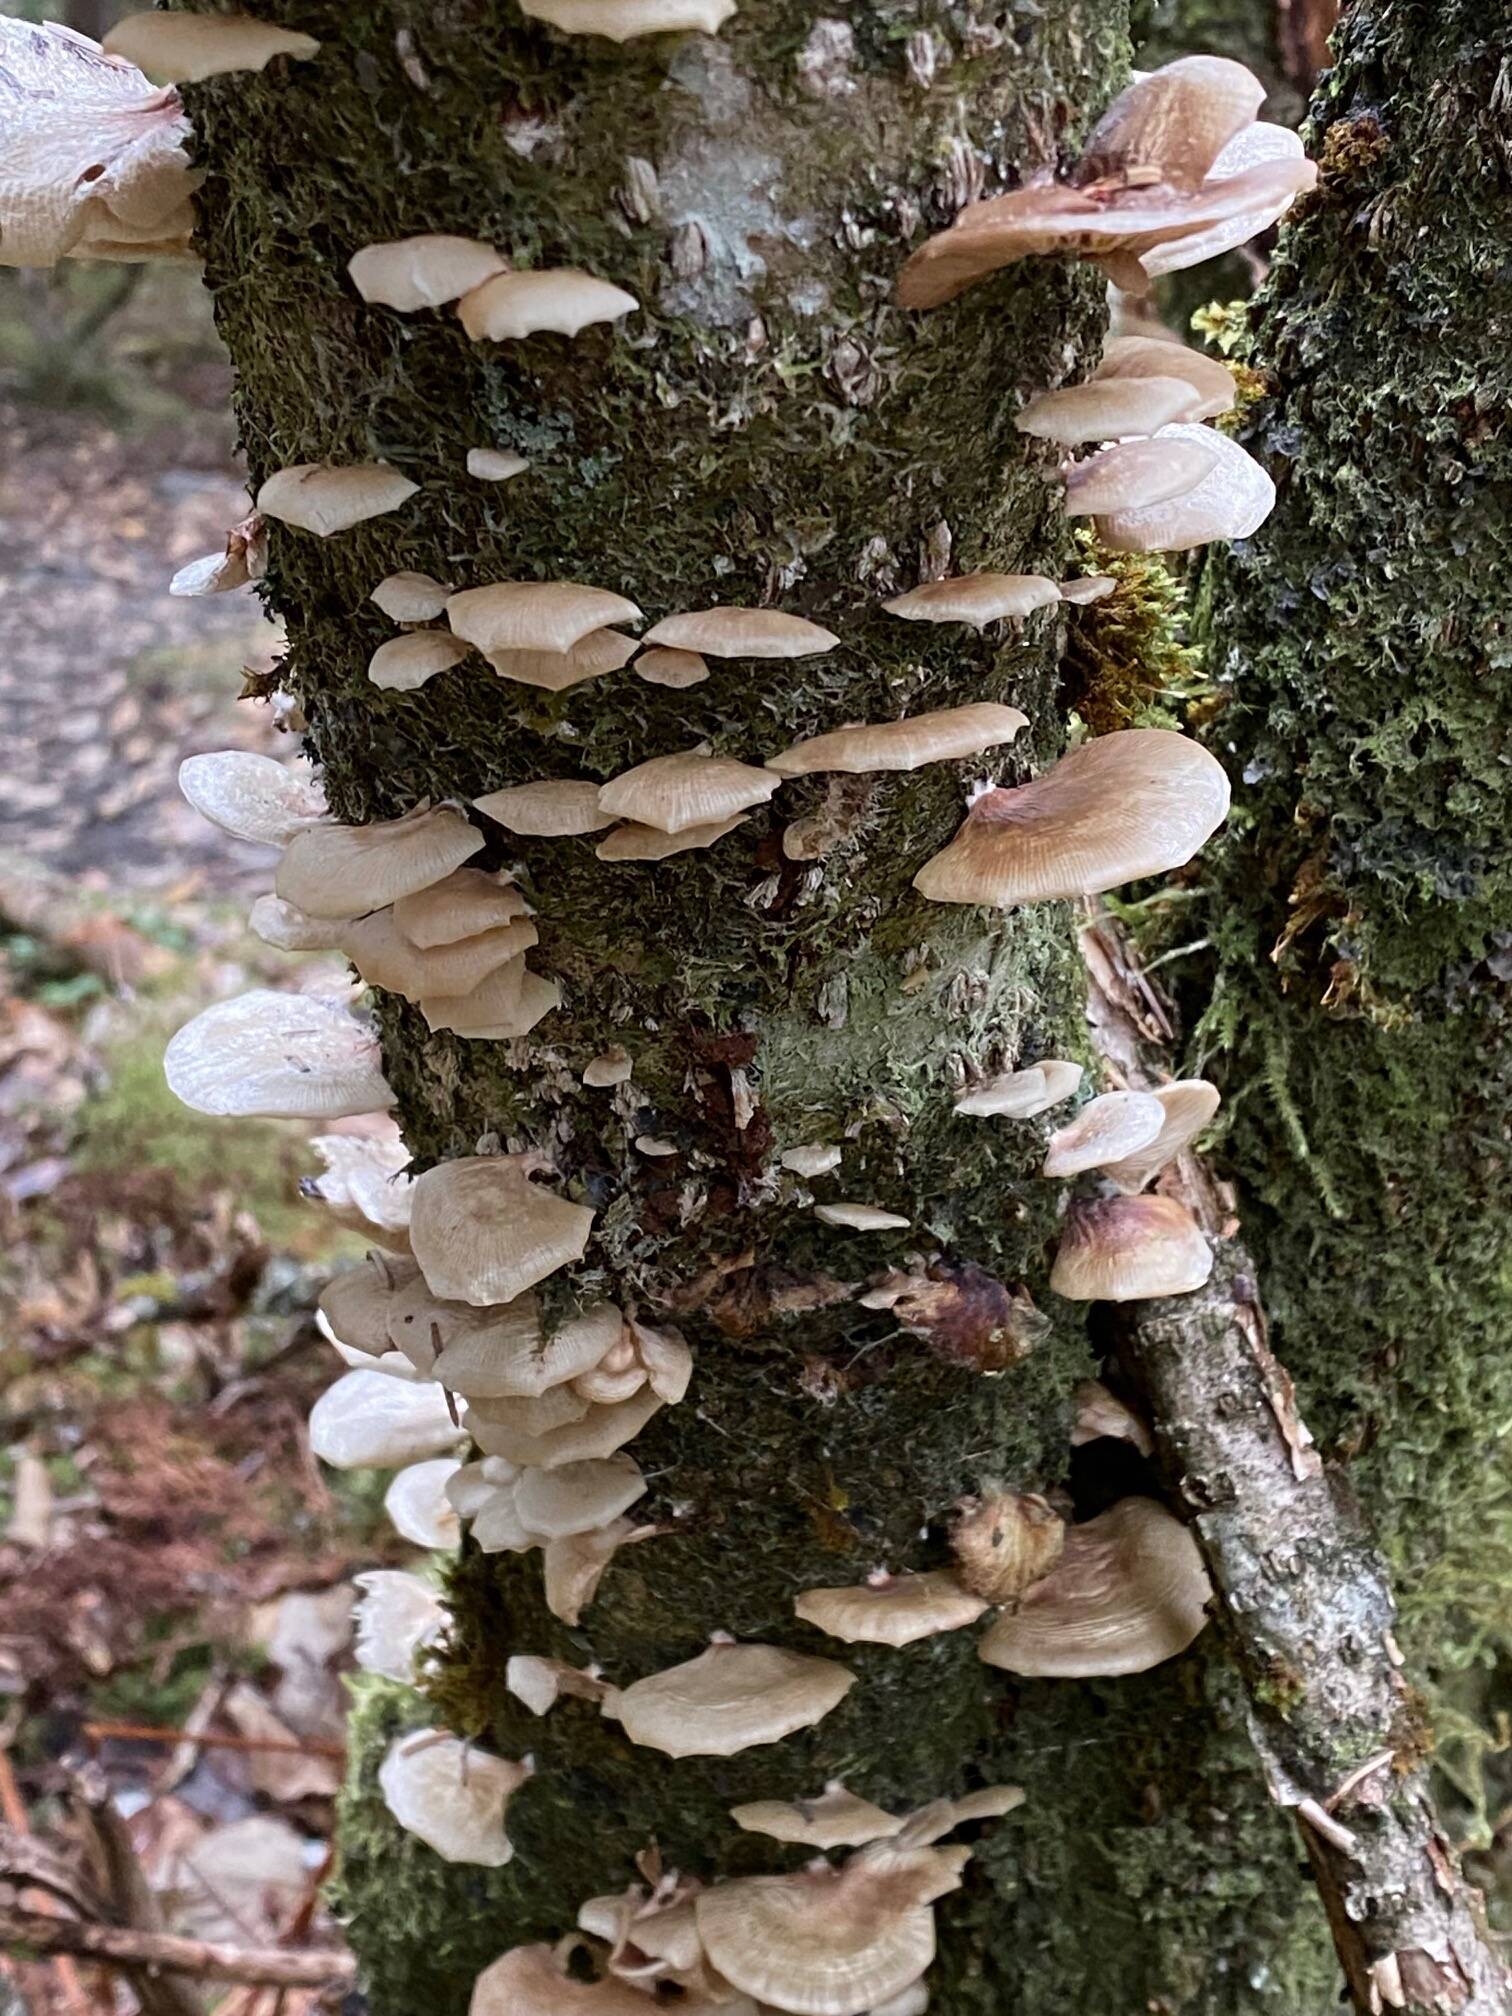 Greenback oyster mushrooms thrive on a decaying tree trunk along West Glacier Trail on Oct. 18. (Photo by Denise Carroll)